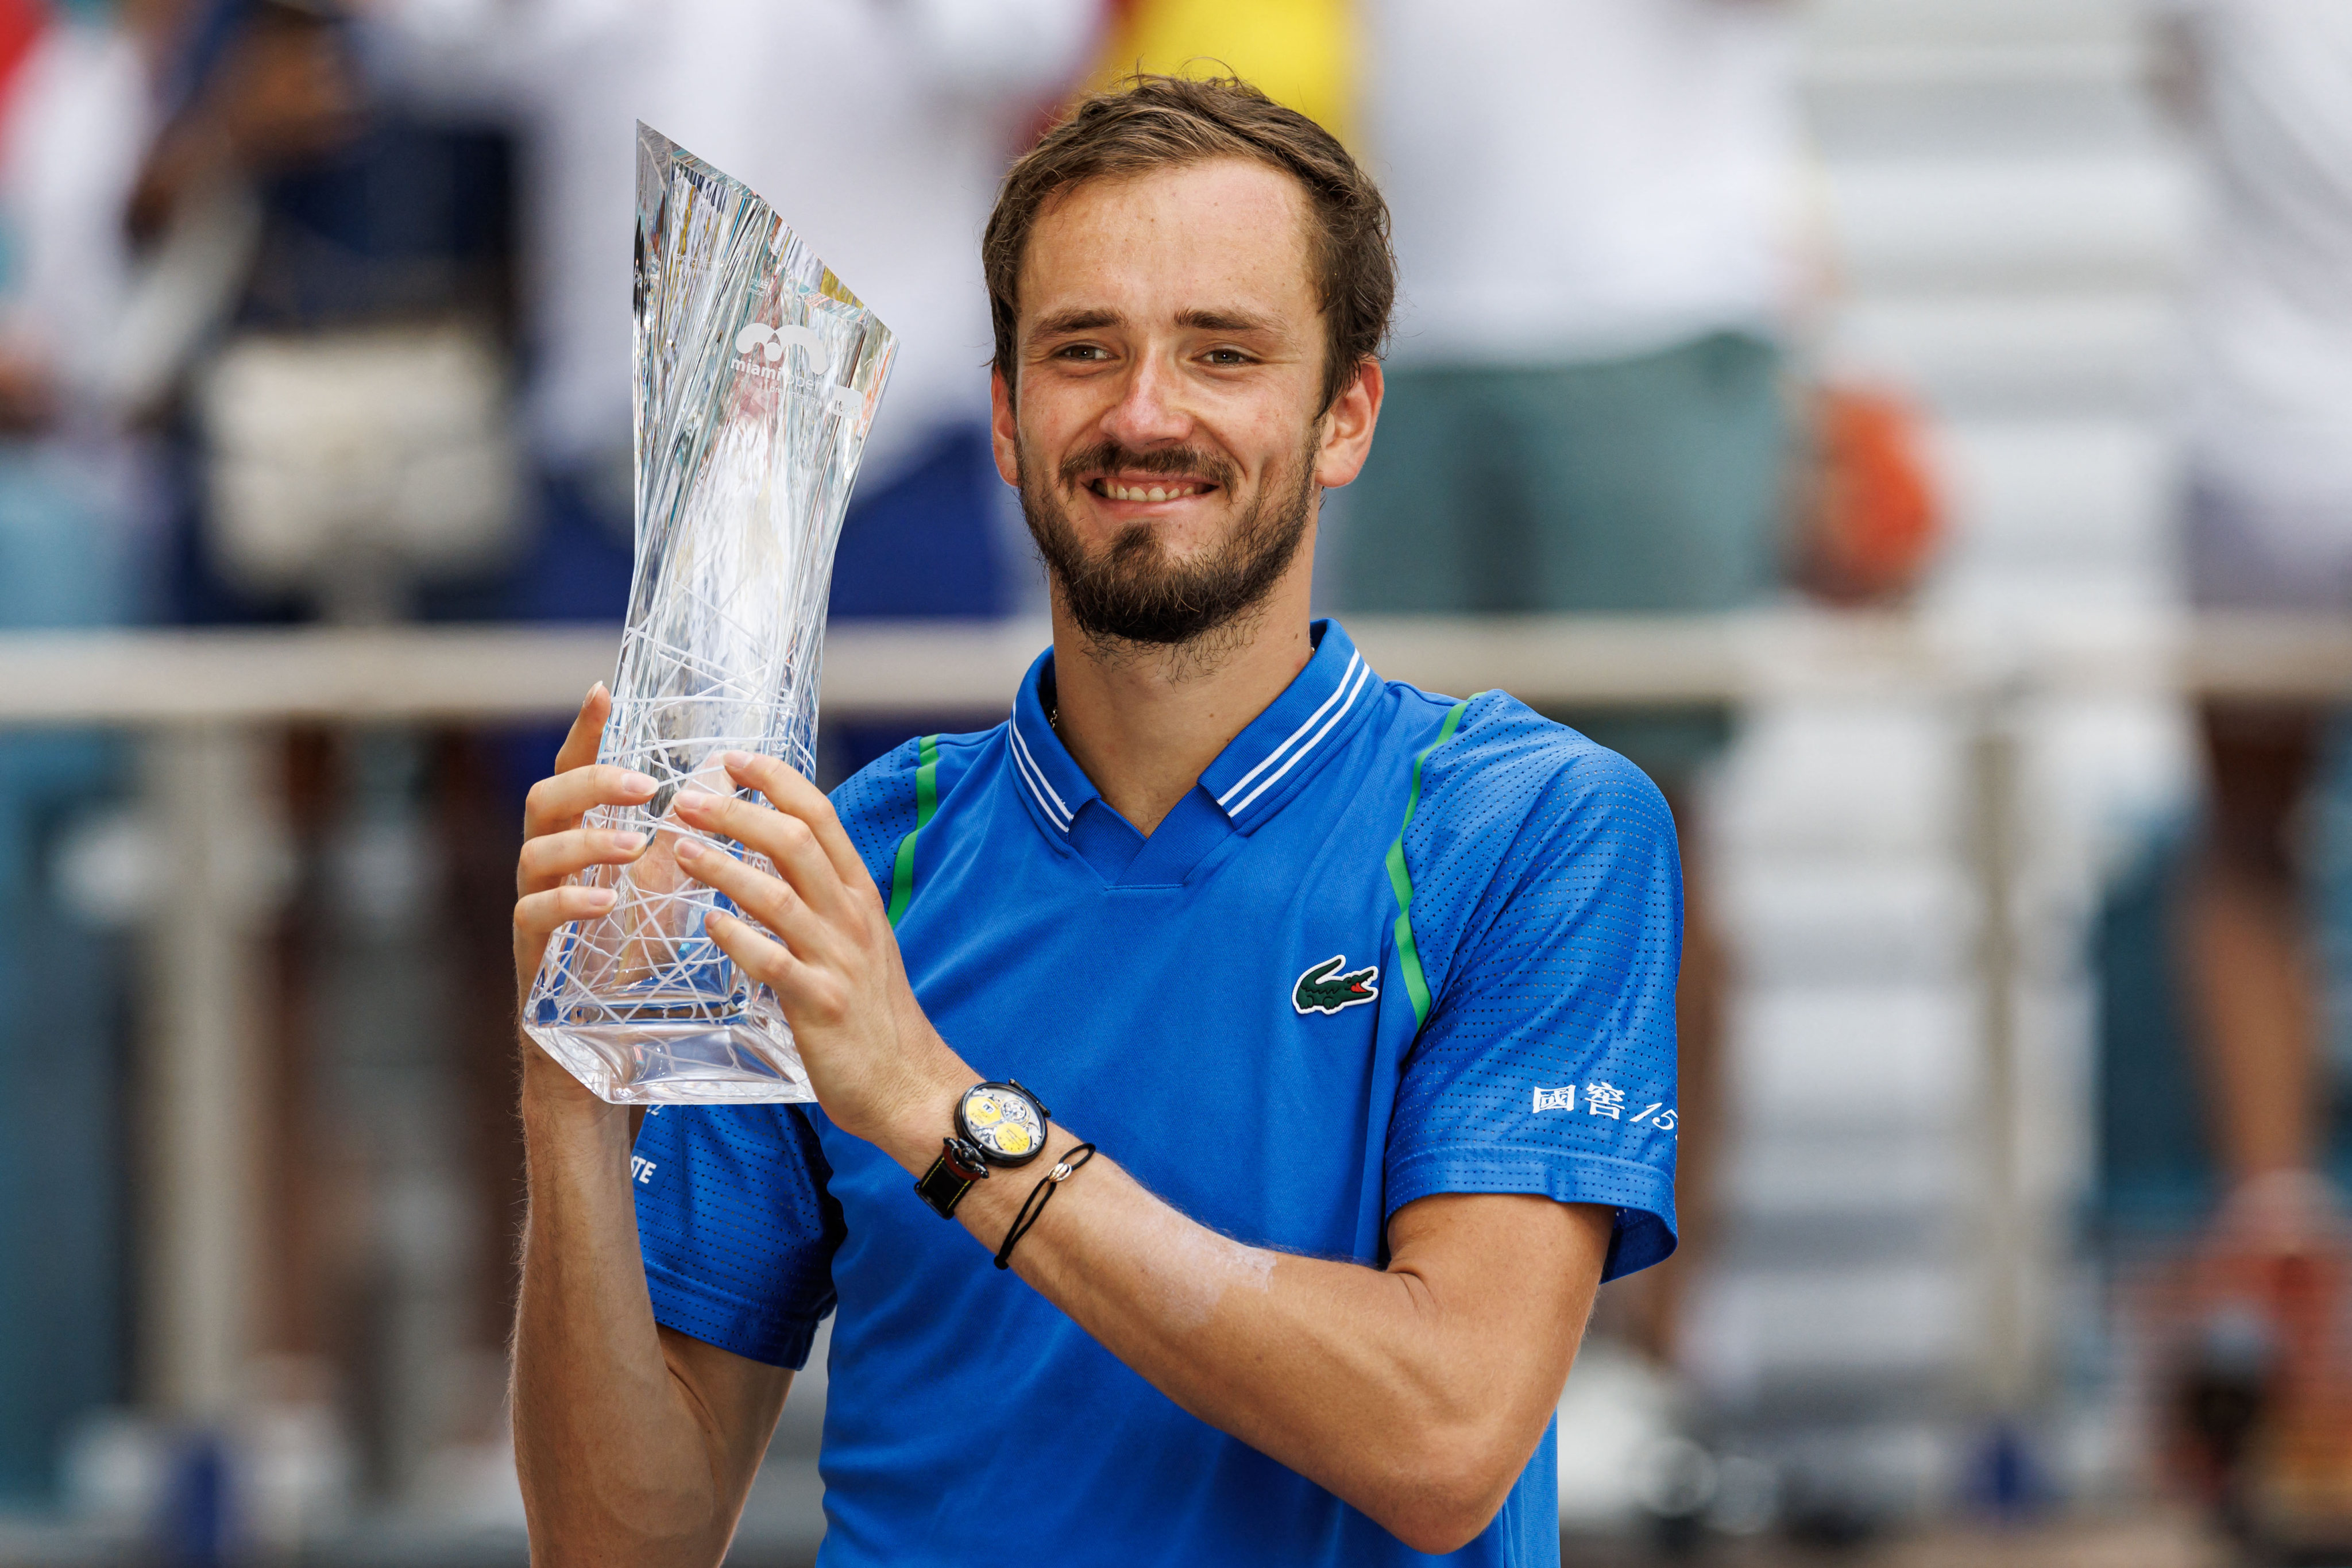 Daniil Medvedev celebrates with the trophy after his victory over Jannik Sinner in the men’s singles final of the Miami Open at Hard Rock stadium. Photo: USA TODAY Sports